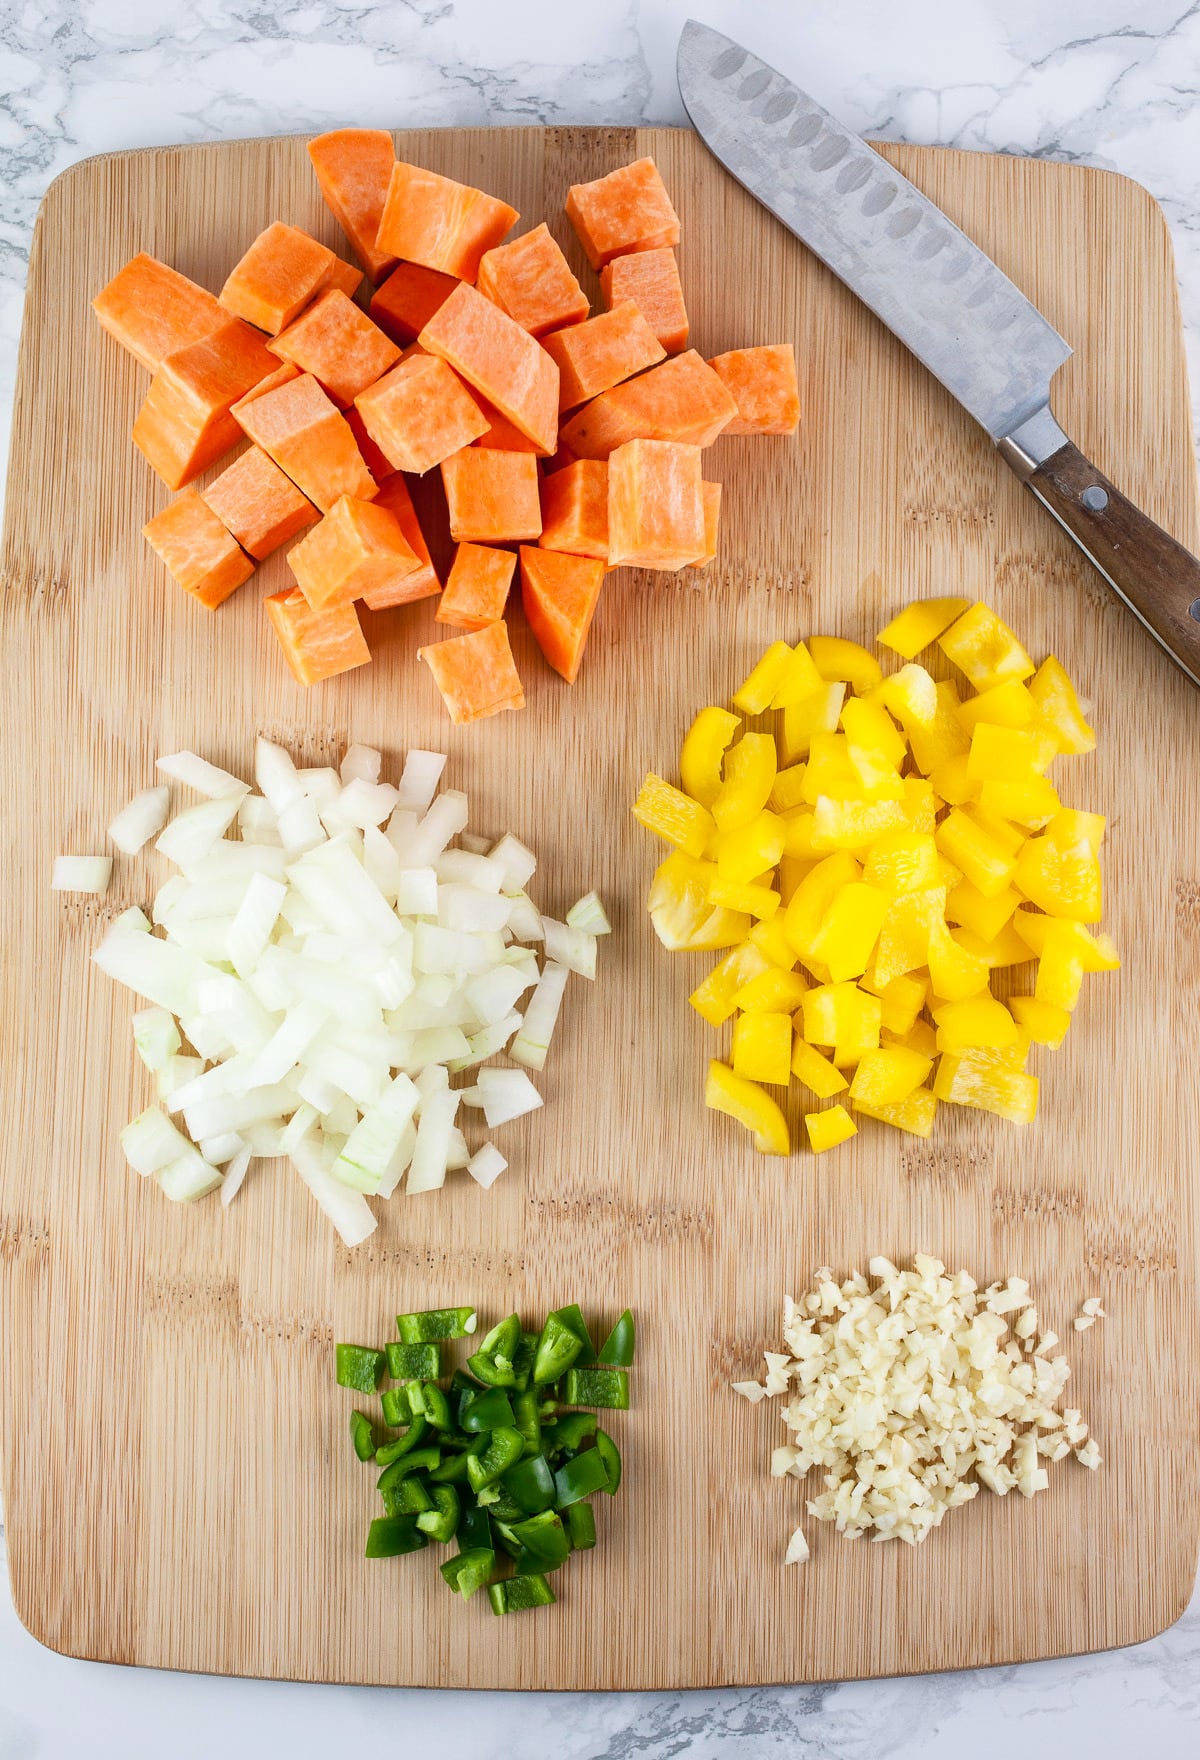 Minced garlic, jalapeno, onion, yellow bell pepper, and chopped sweet potatoes on wooden cutting board with knife.